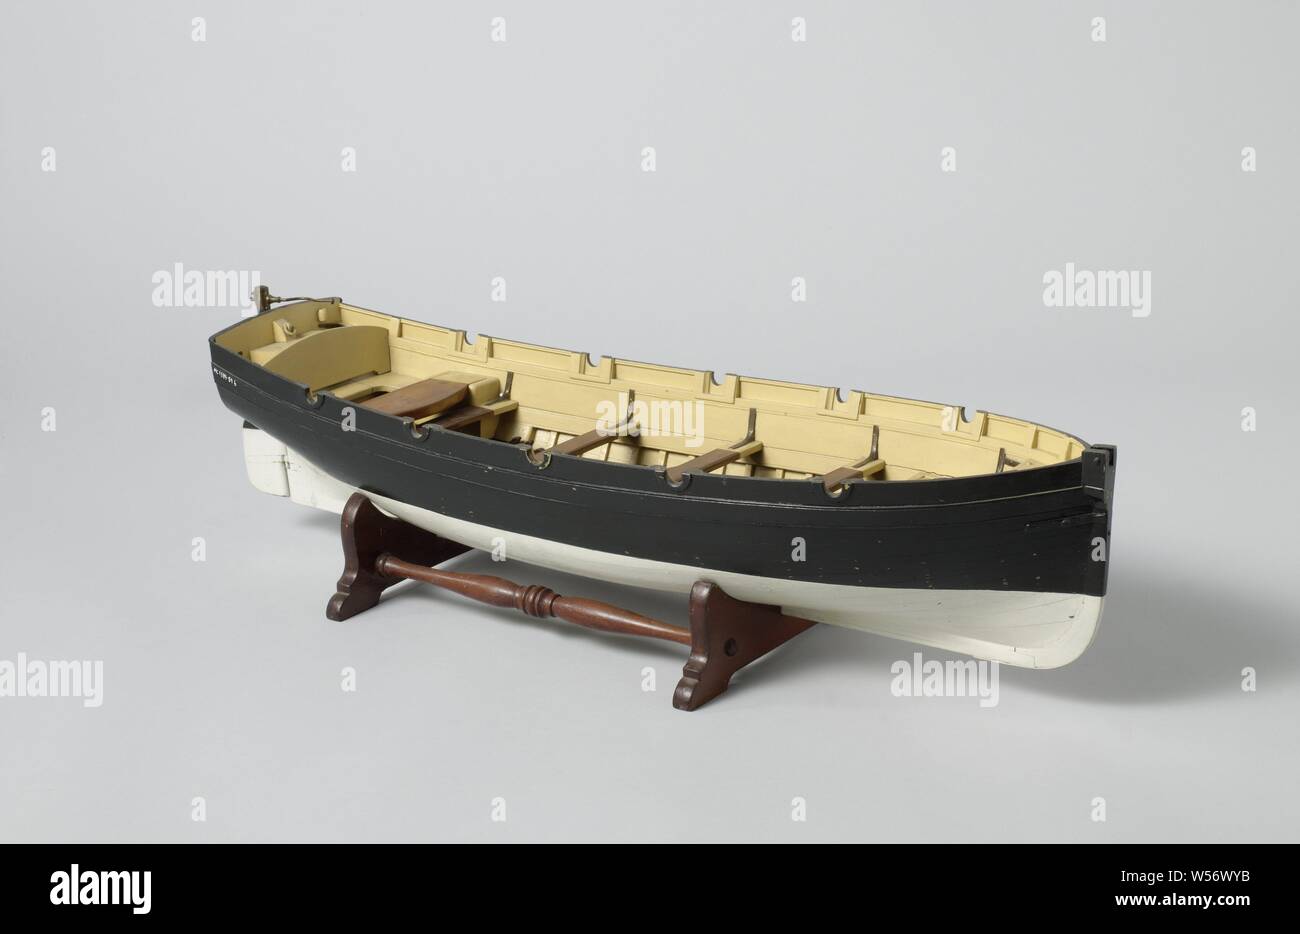 Model of a Longboat, Polychromed truss model on a standard. Smooth-edged double-belted bark, curved with almost flat sheer and flat mirror, disc in the prow, a forecourt, five dulls and four rails, and an open cabin with side depths and extra loose doft. Simple rudder with a curved brass tiller to get around the grape mast. 1:10 scale (derived)., anonymous, Netherlands, c. 1865 - c. 1880, wood (plant material), brass (alloy), model: h 16.4 cm × l 63 cm × w 19.8 cm packaging capsule: h 21 cm × w 65 cm × d 24 cm Stock Photo